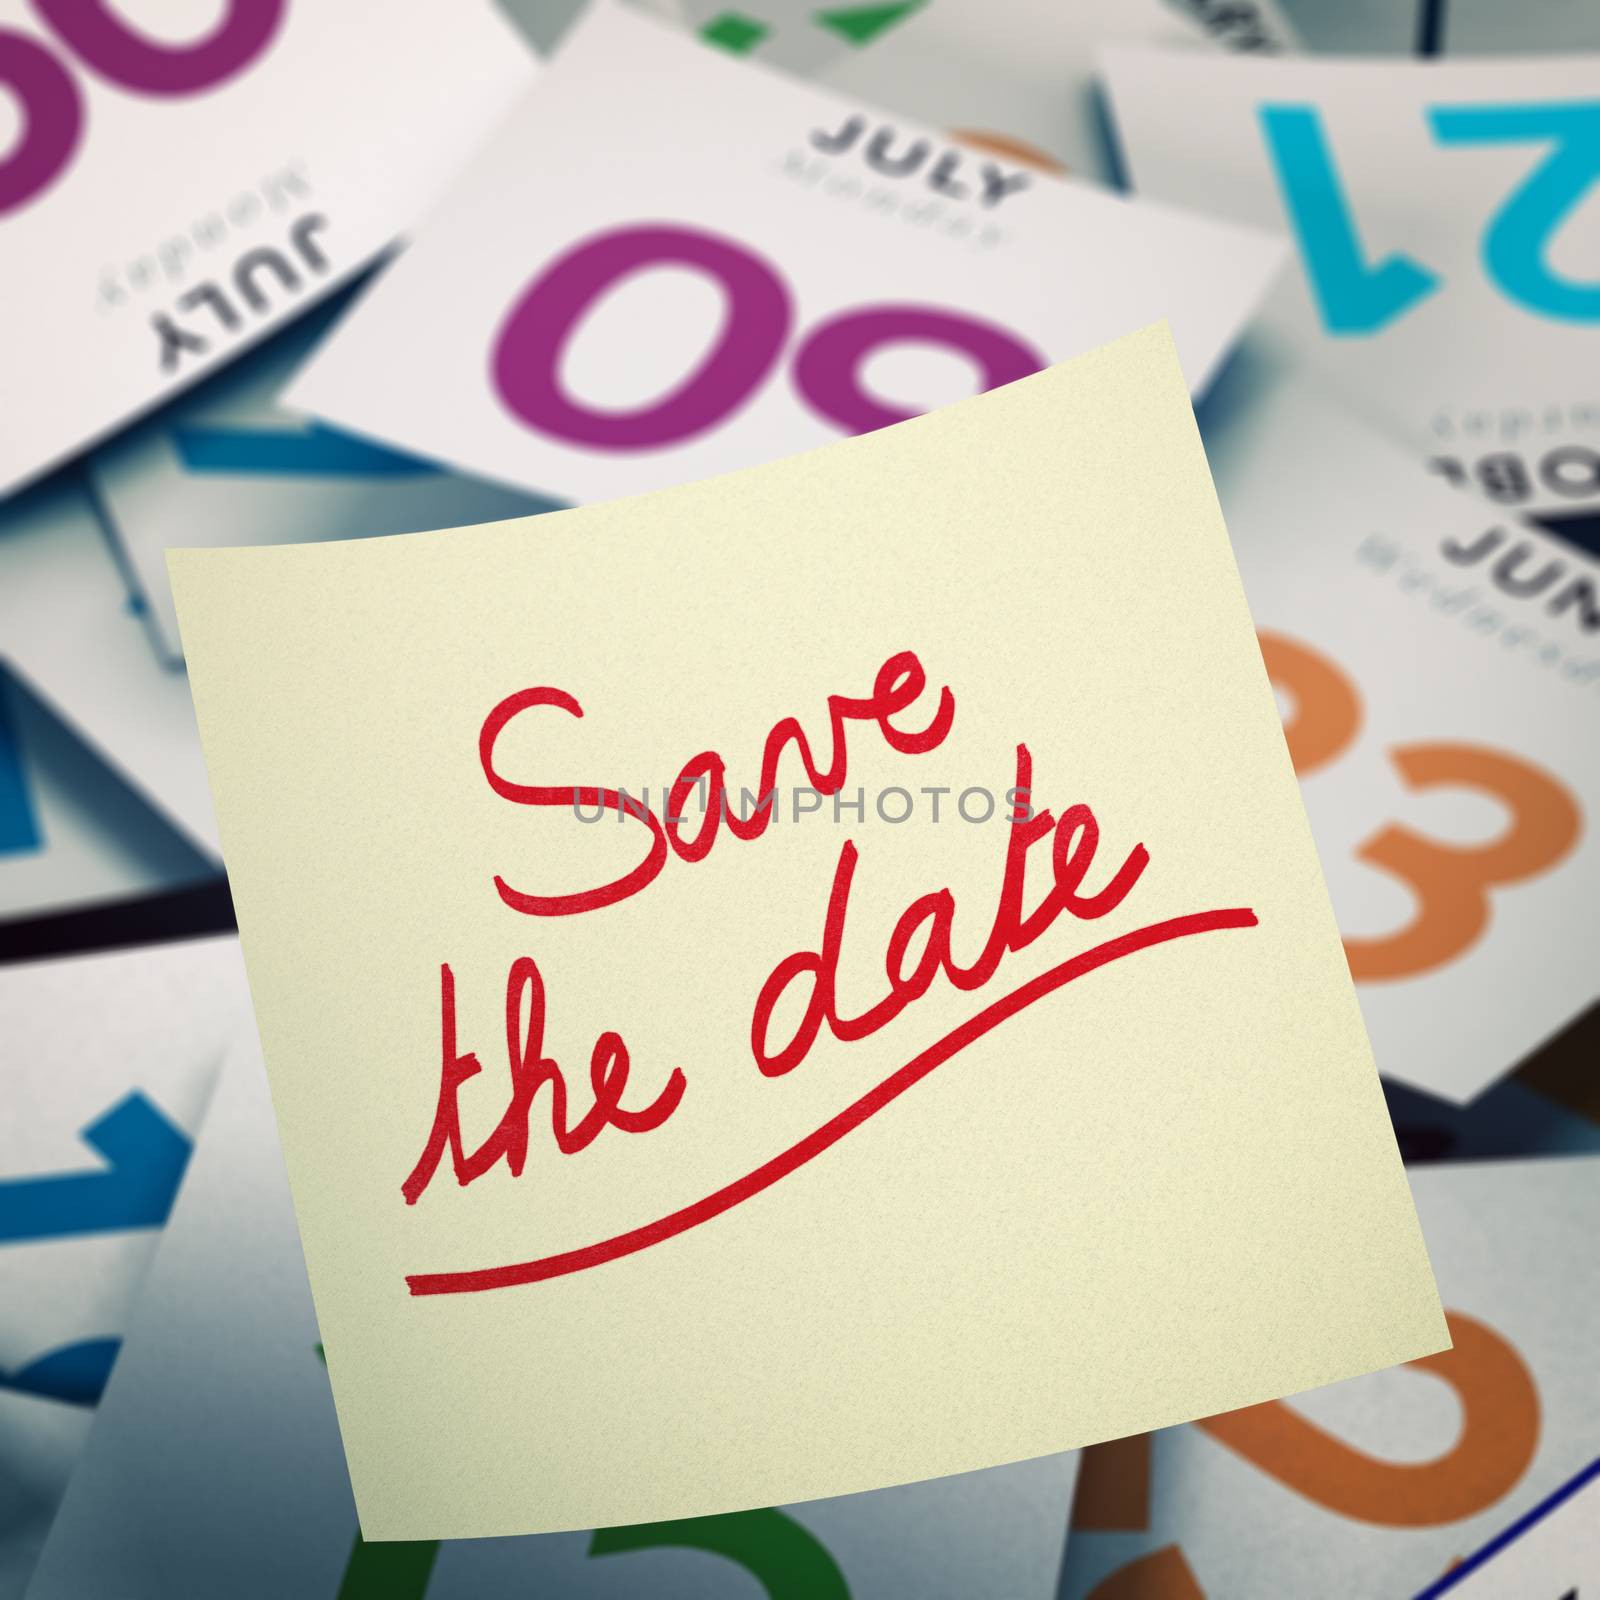 Save the Date, Special Event Communication Concept by Olivier-Le-Moal